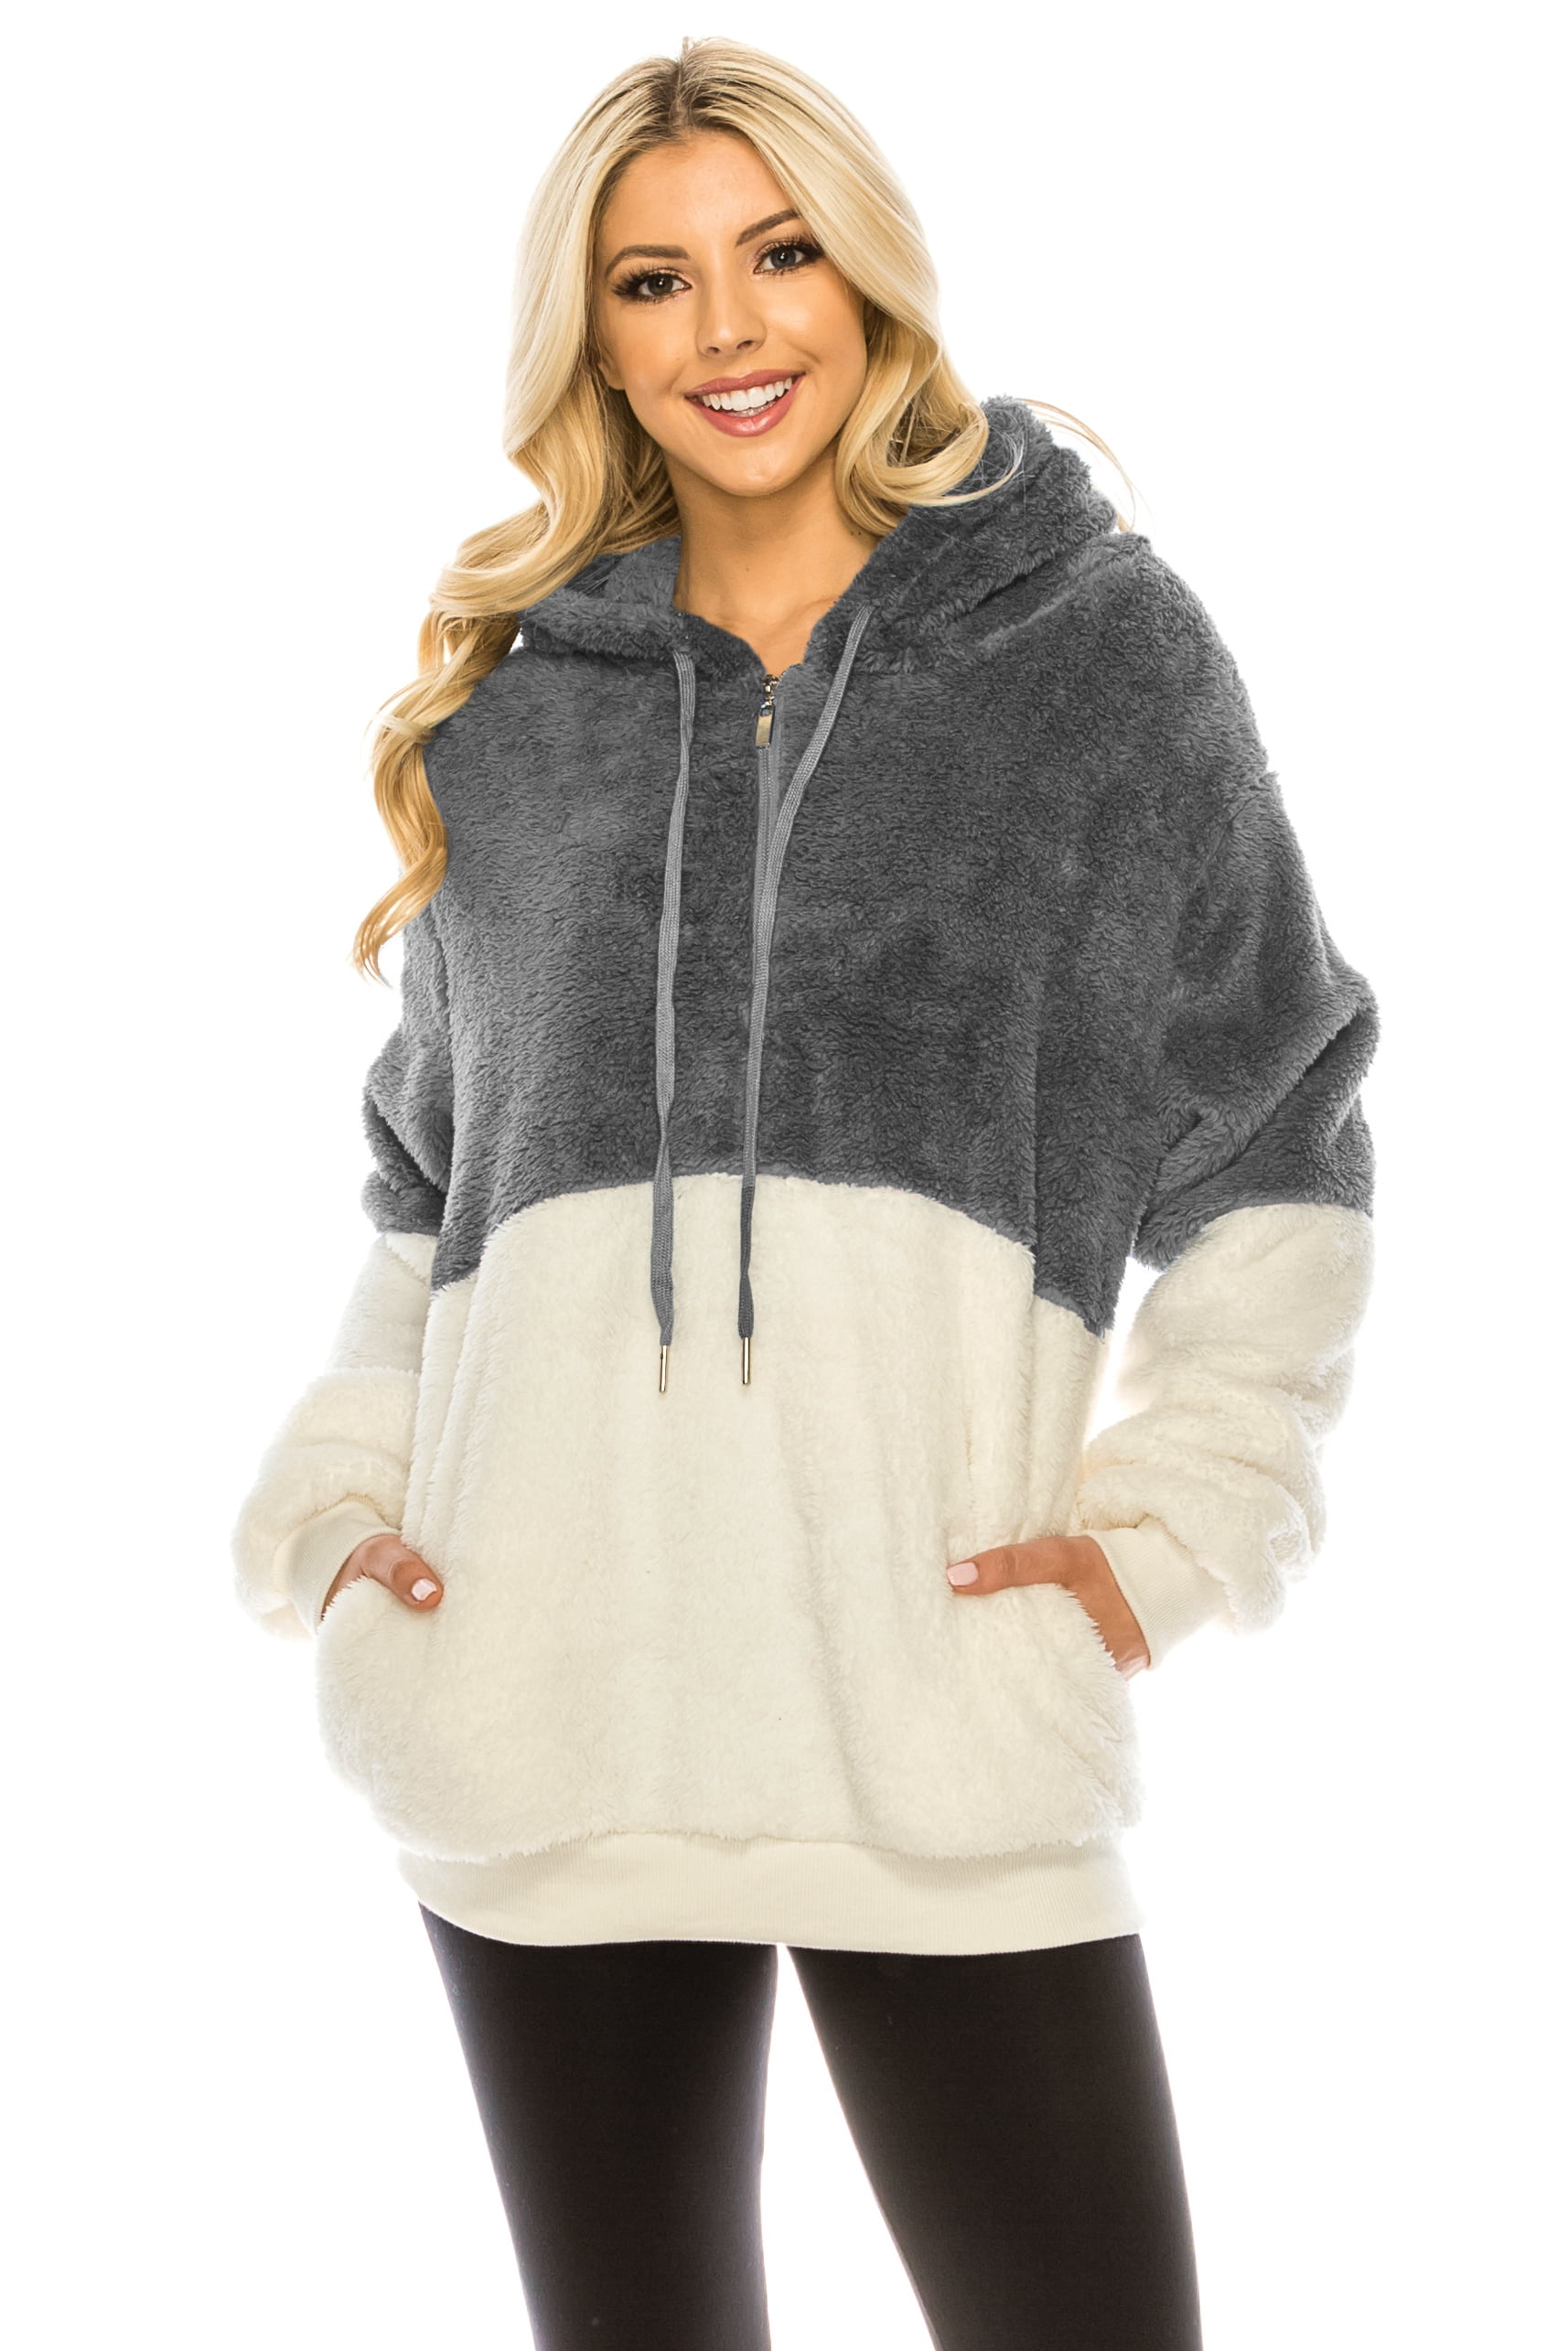 Haute Edition Women's Colorblock and Solid 1/4 Zip Sherpa Hoodie